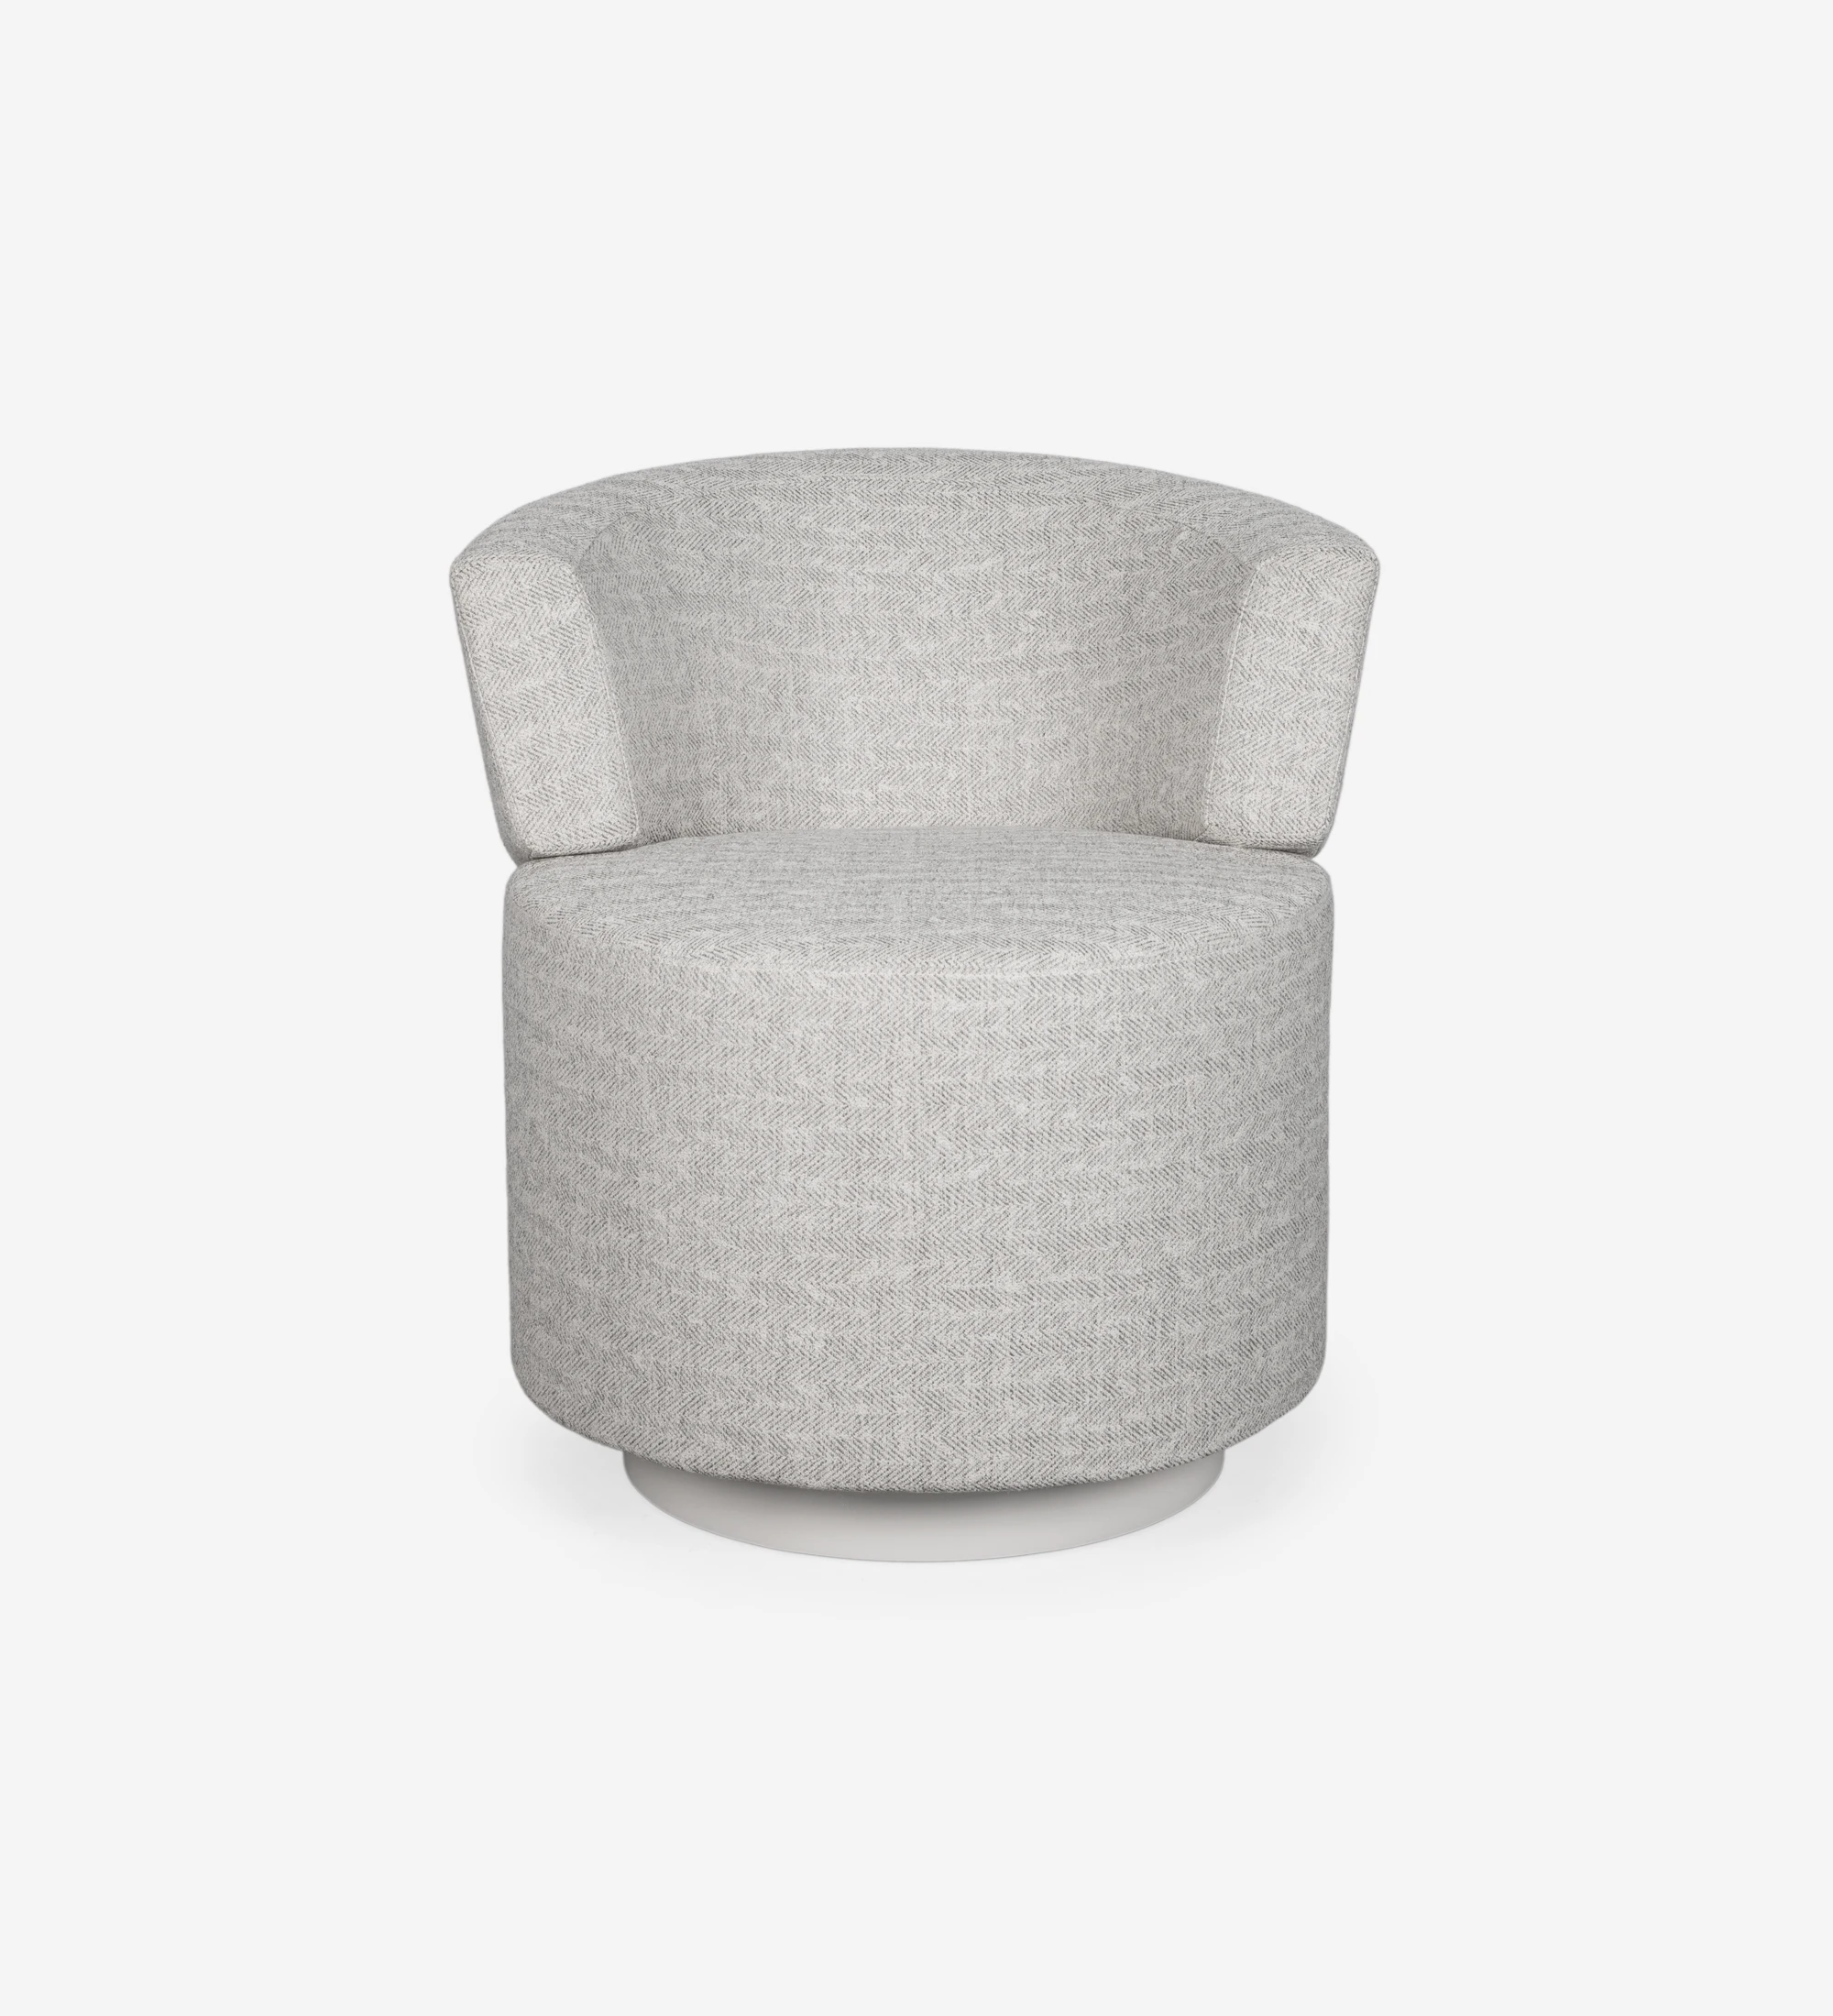 Londres swivel armchair, upholstered in light gray fabric, pearl lacquered baseboard.